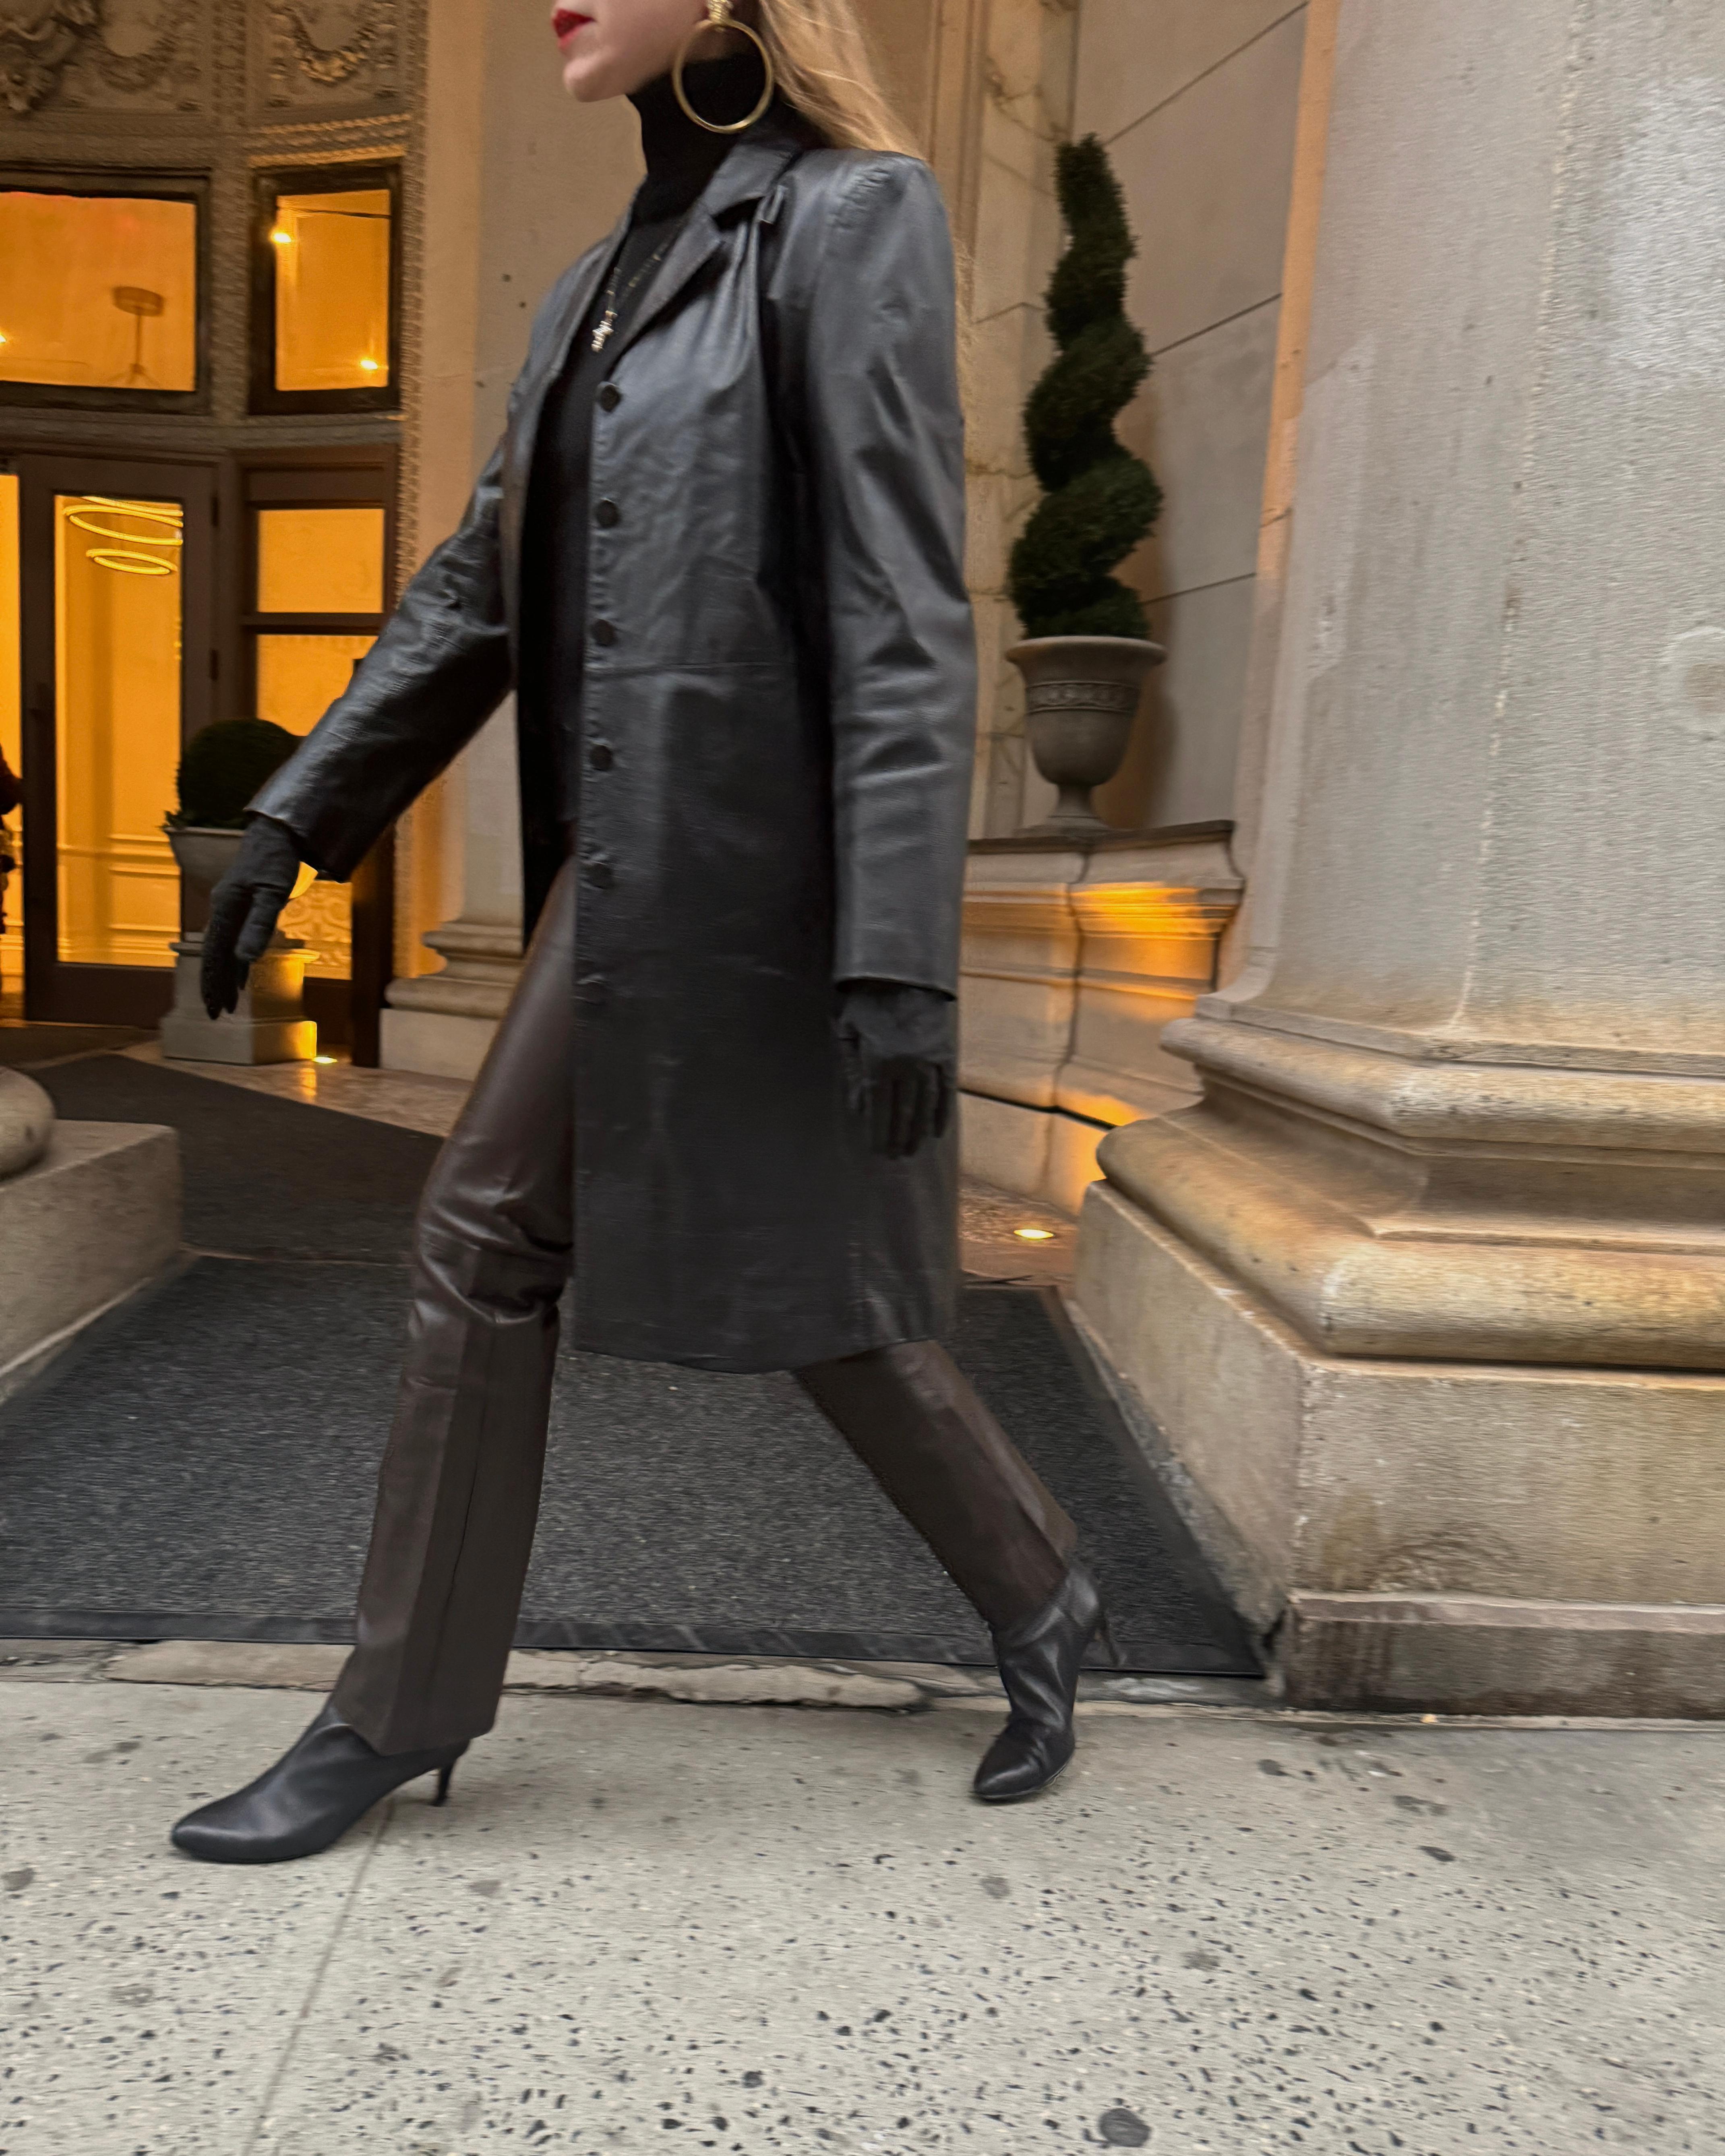 Vintage Black Leather Trench Coat In Excellent Condition For Sale In New York, NY